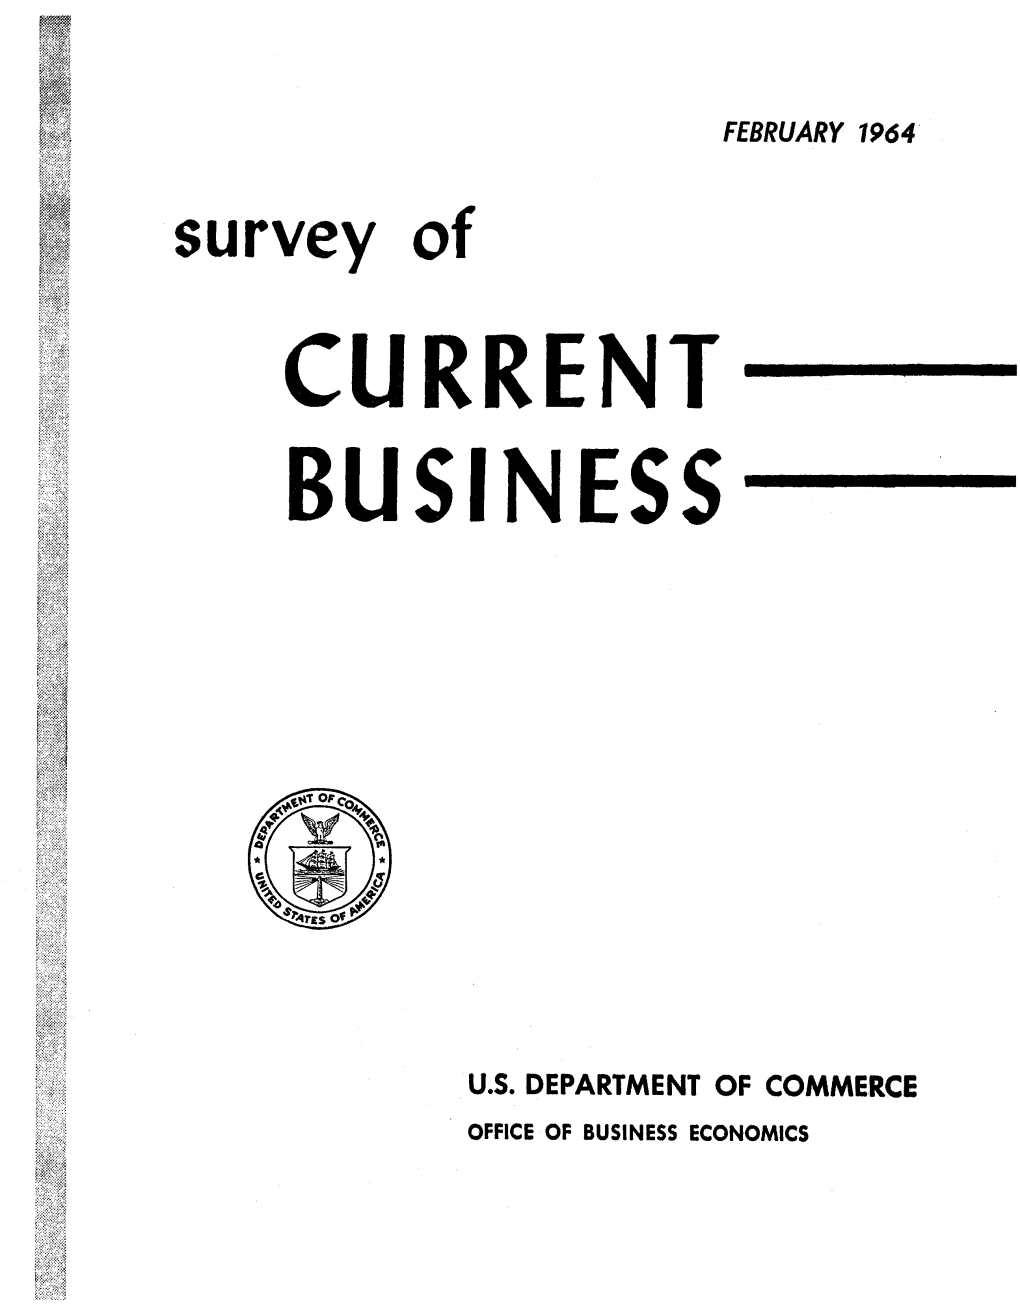 SURVEY of CURRENT BUSINESS February 1964